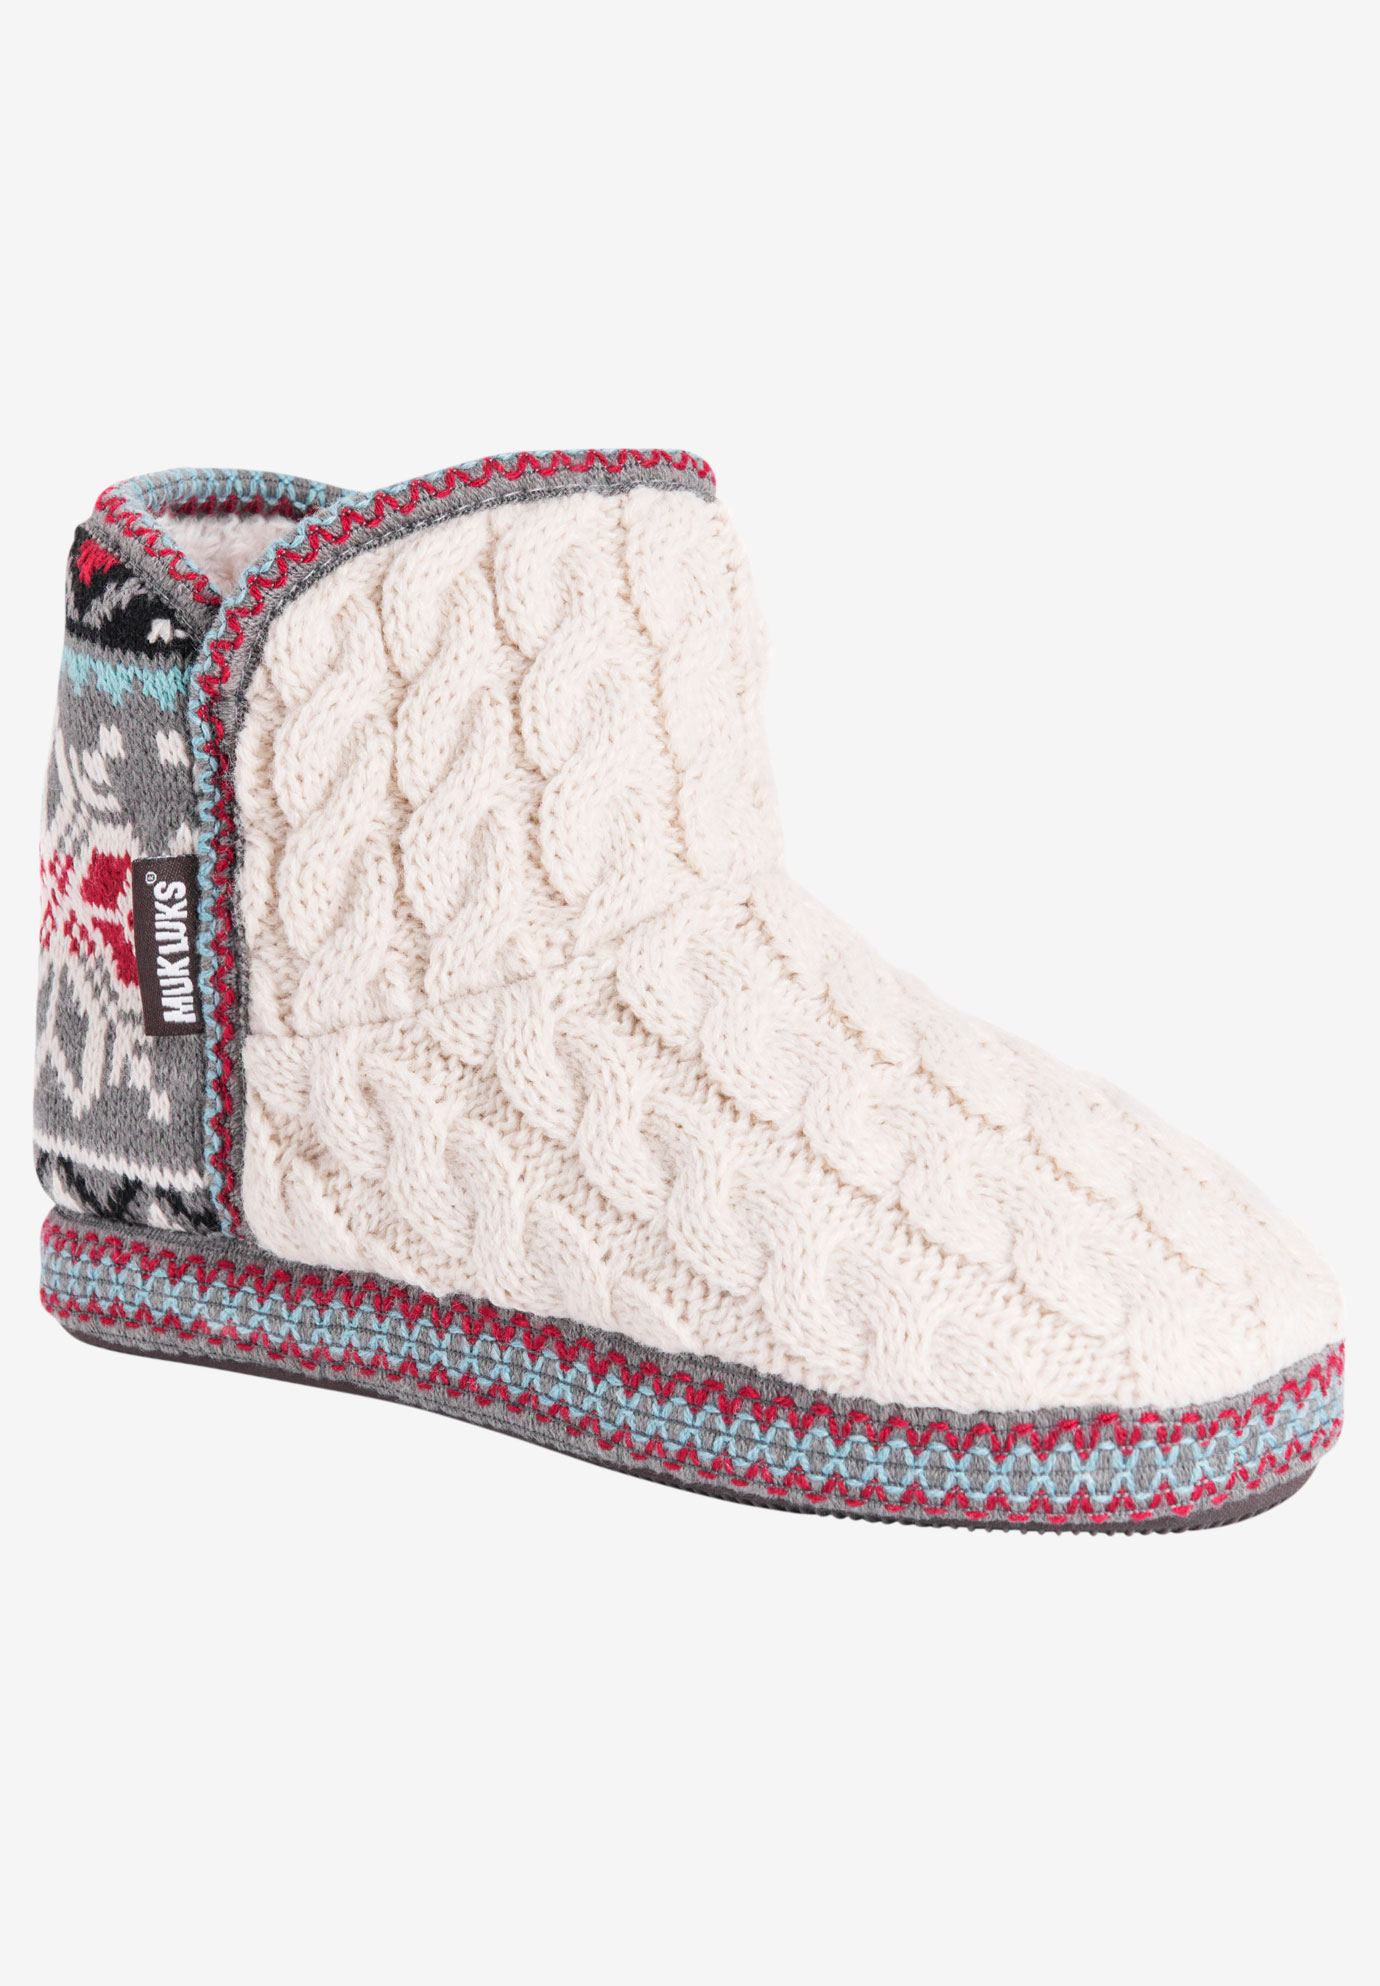 Leigh Slipper Bootie by Muk Luks | Plus Size Robes & Slippers | Woman ...